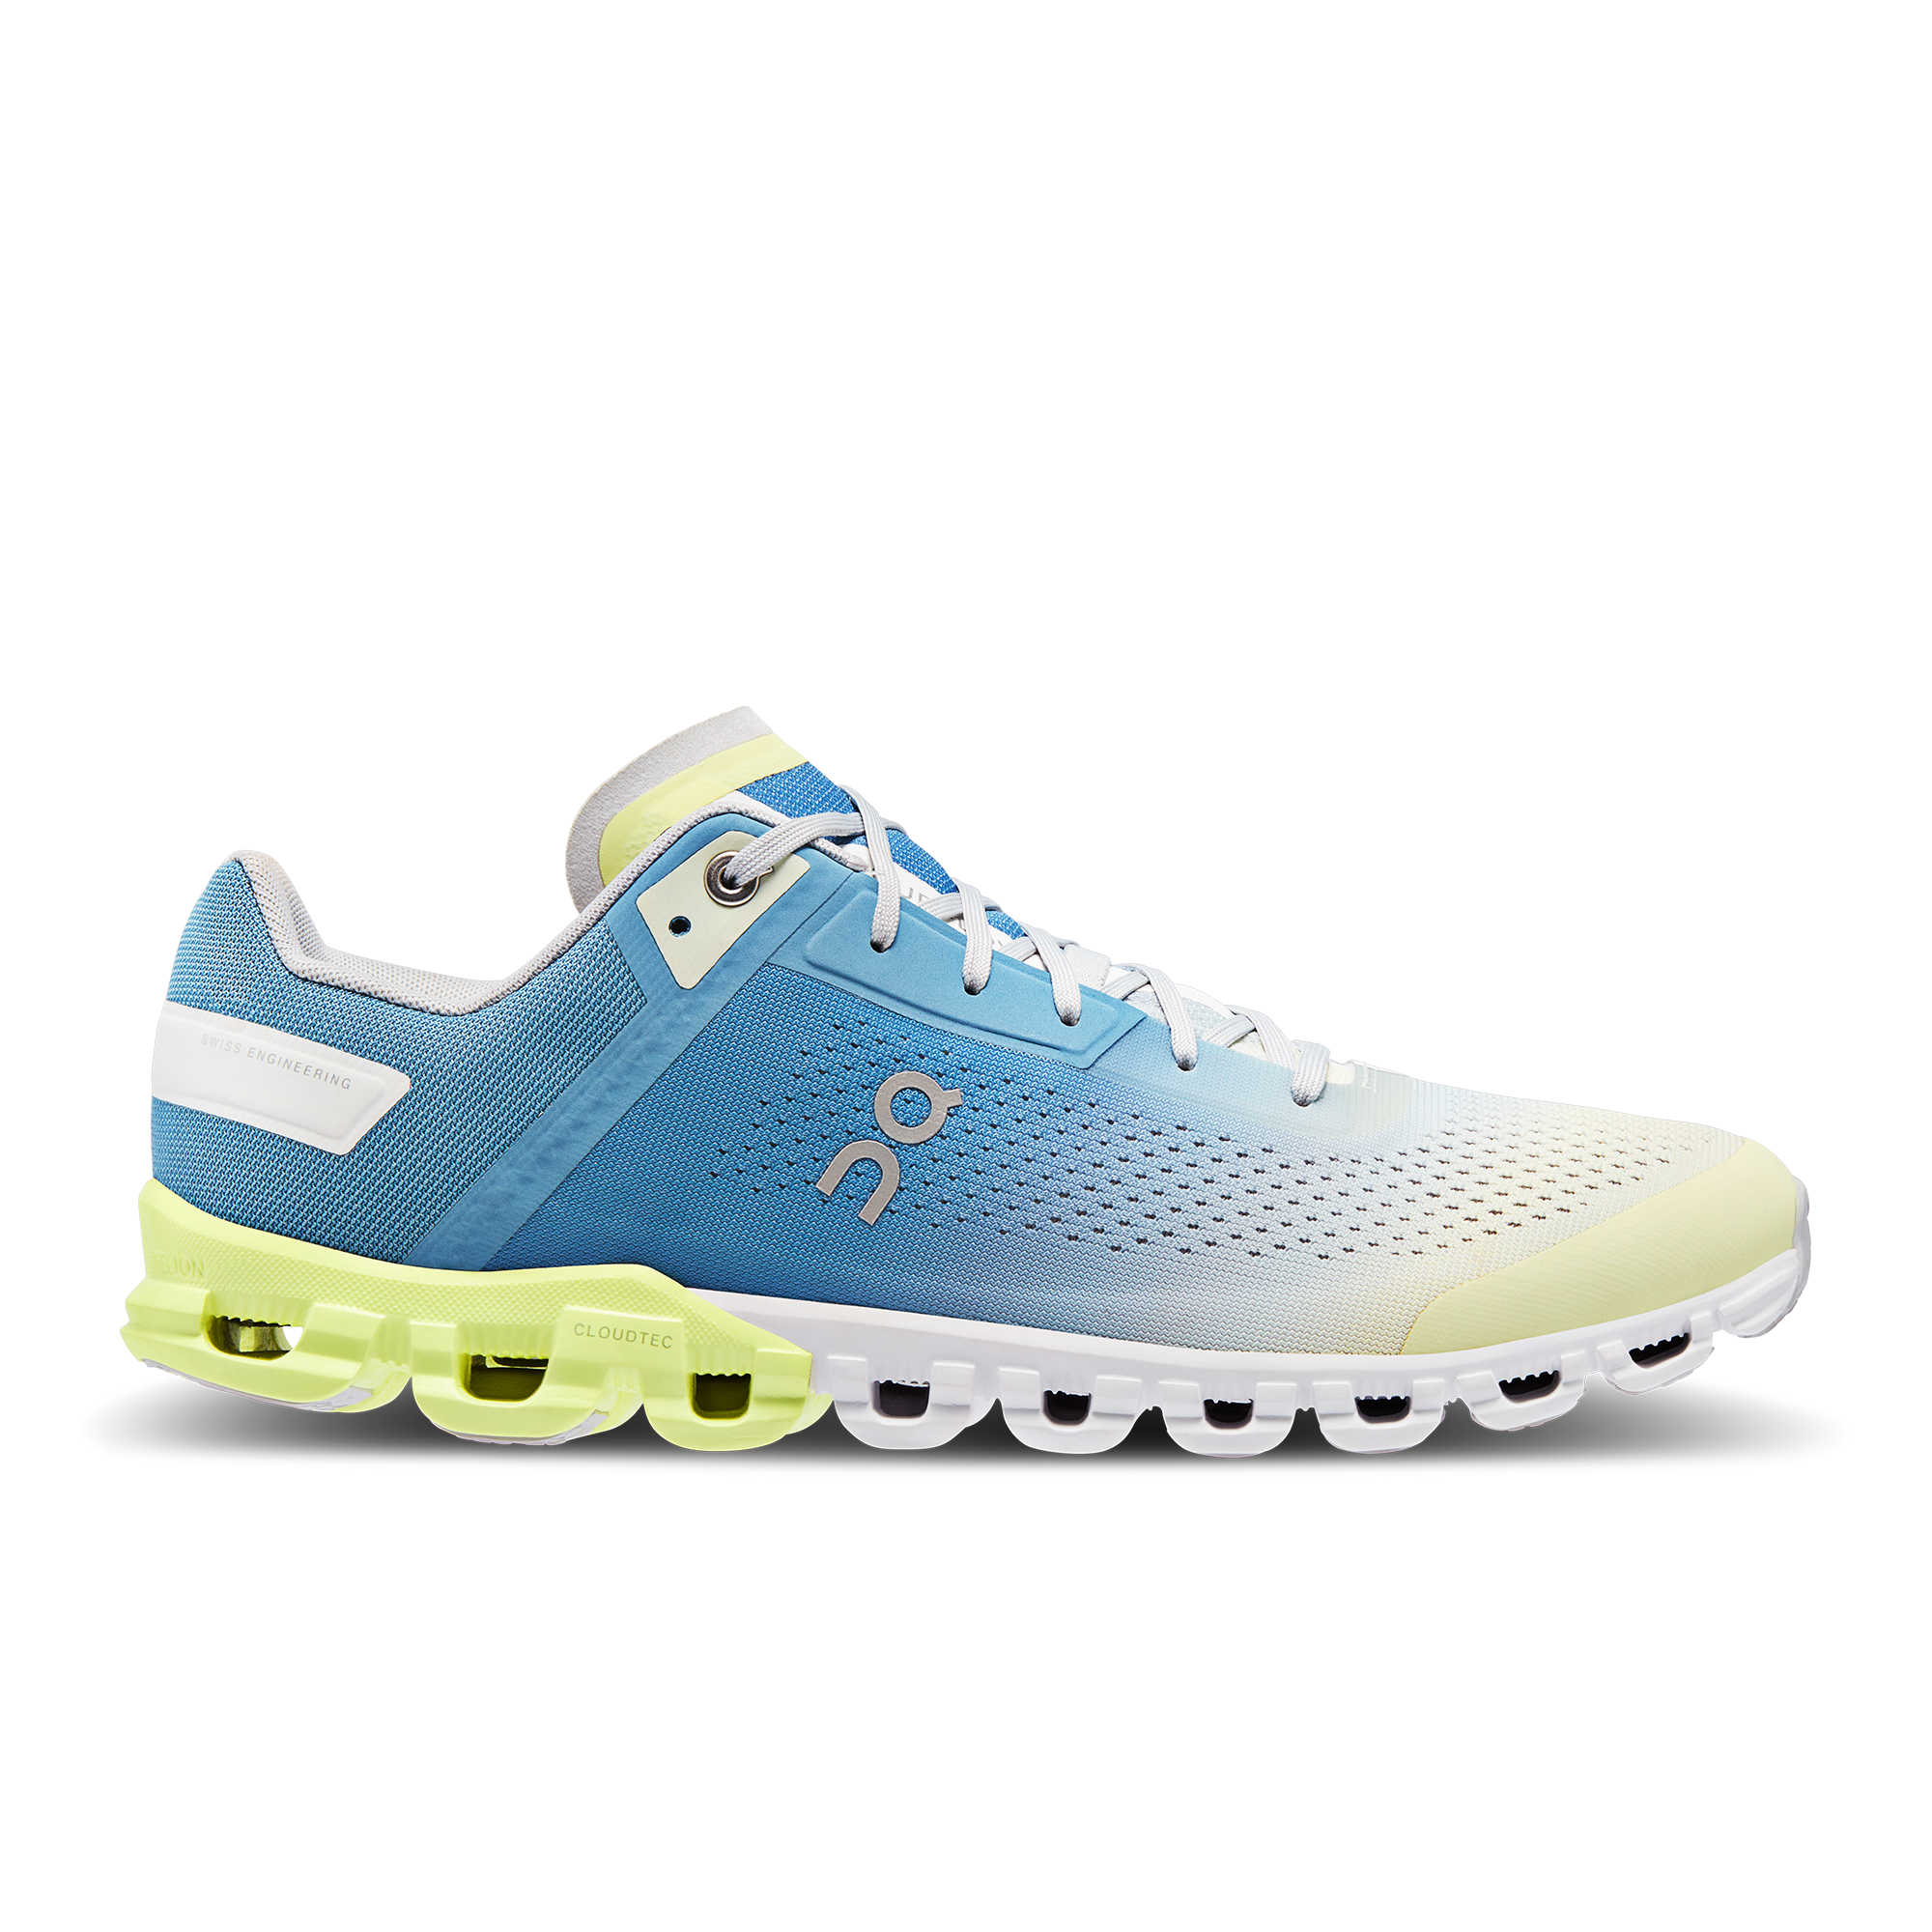 Men's Cloudflow | Blue & Green | On United States